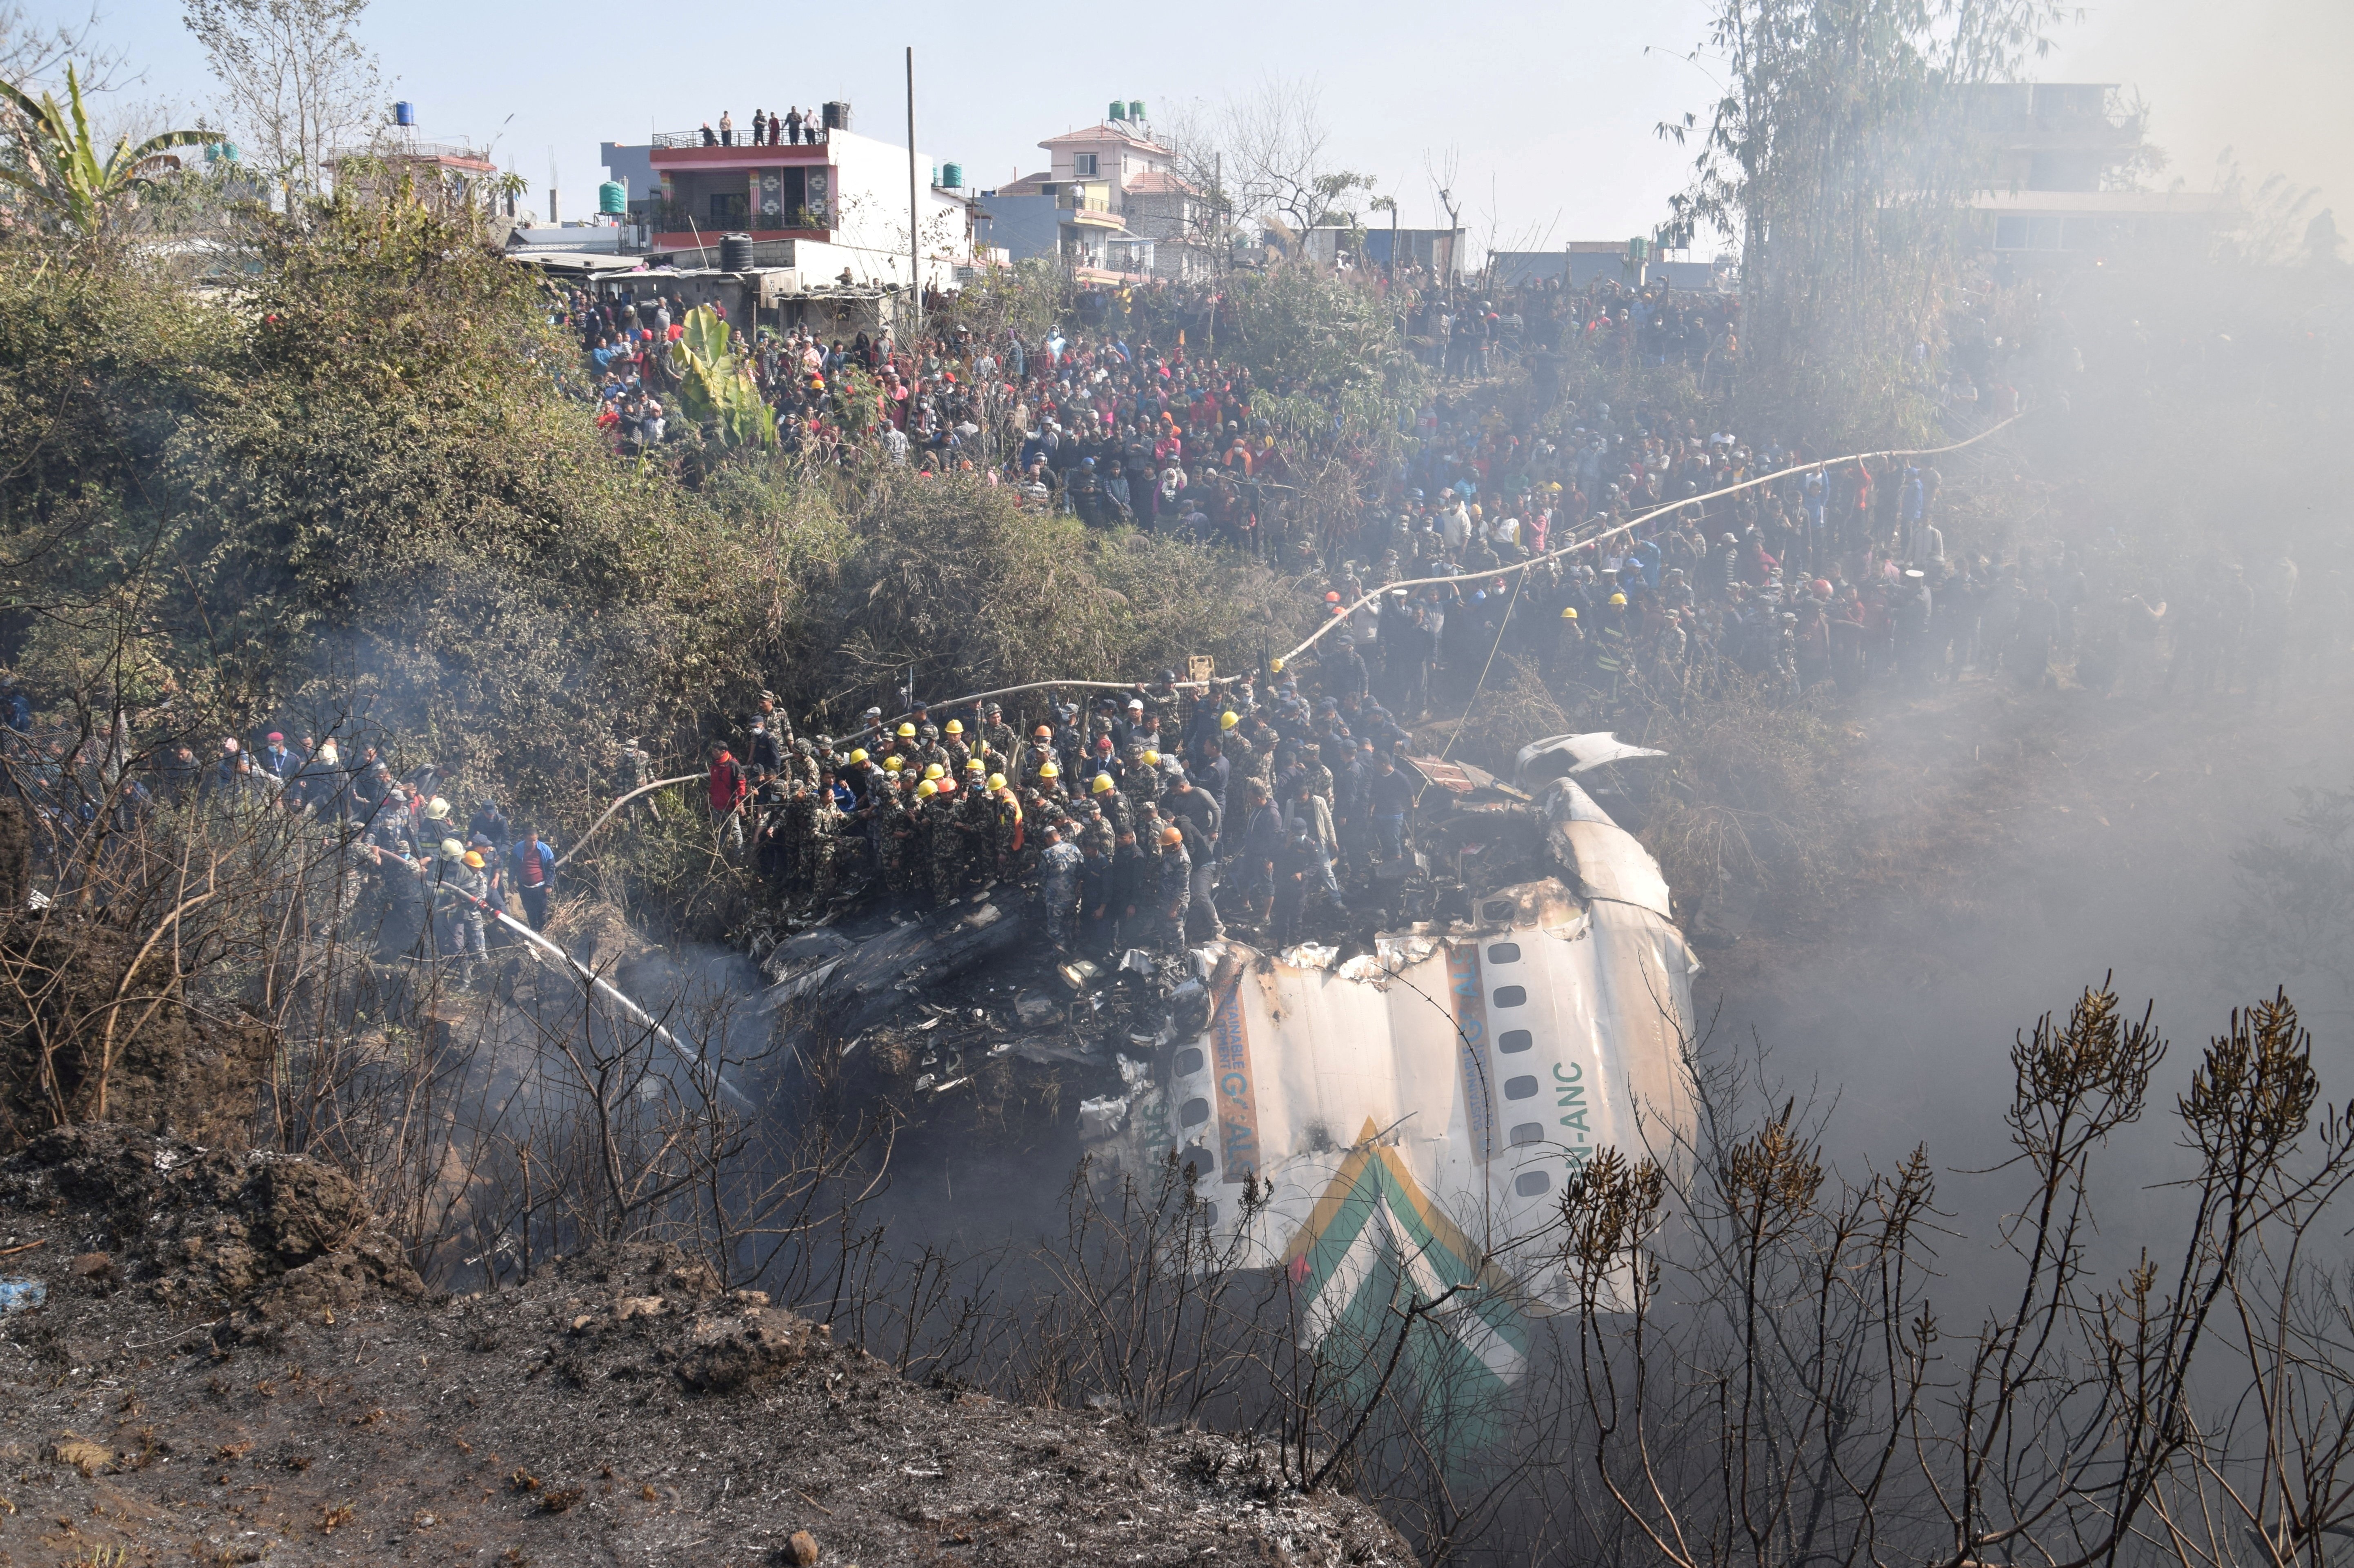 Rescue teams work to retrieve bodies from the wreckage at the crash site of an aircraft carrying 72 people in Pokhara in western Nepal January 15, 2023. Photo: Reuters